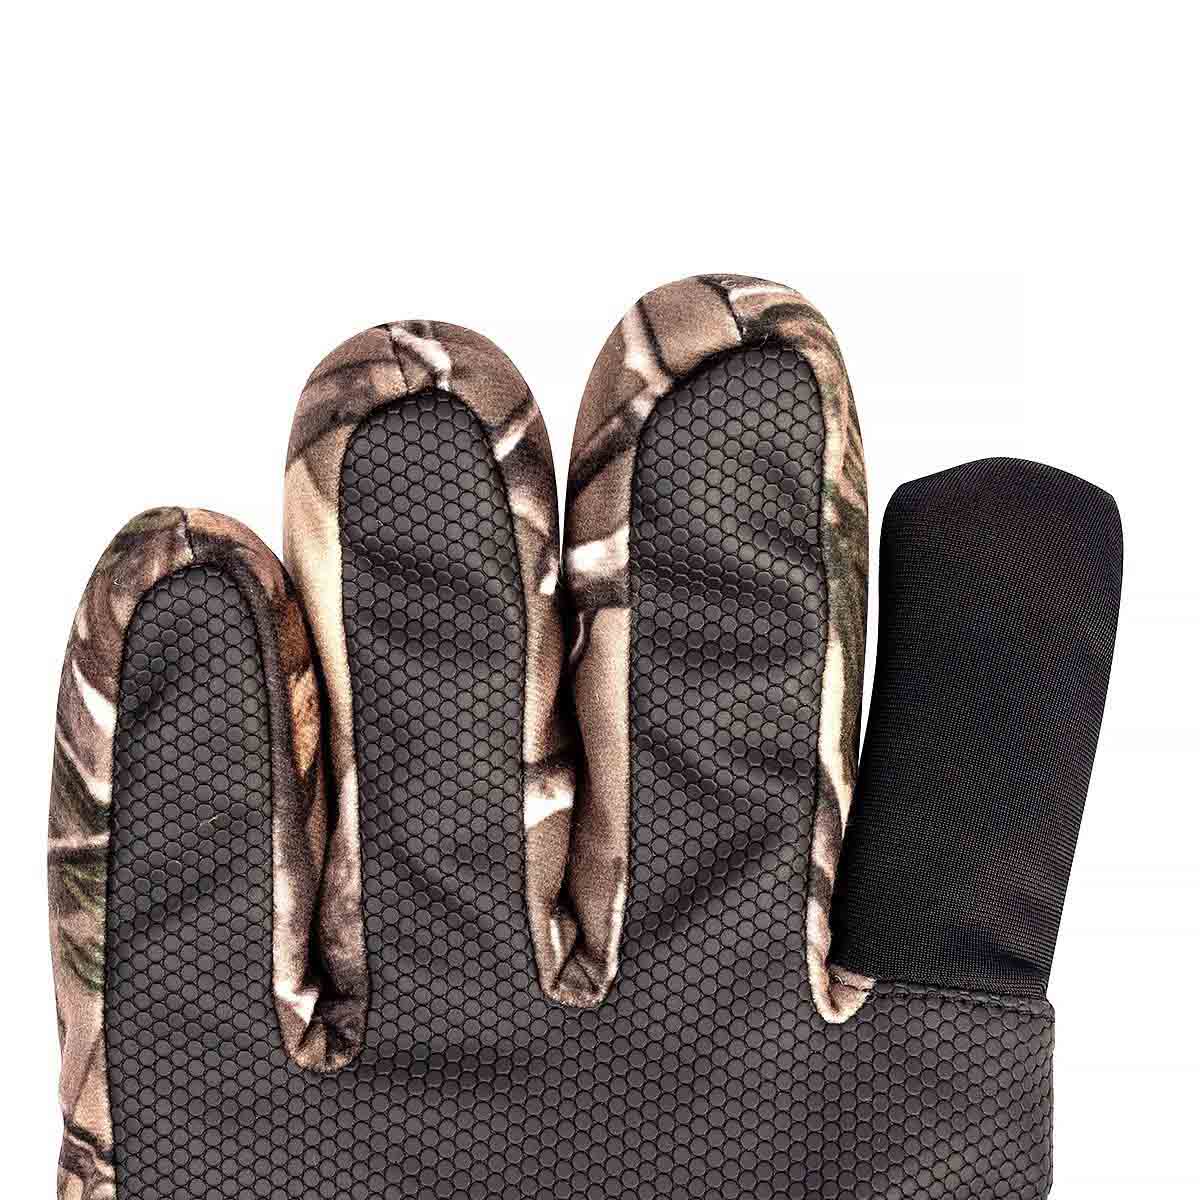 The hunting gloves feature synthetic leather grip on the palm and fingers